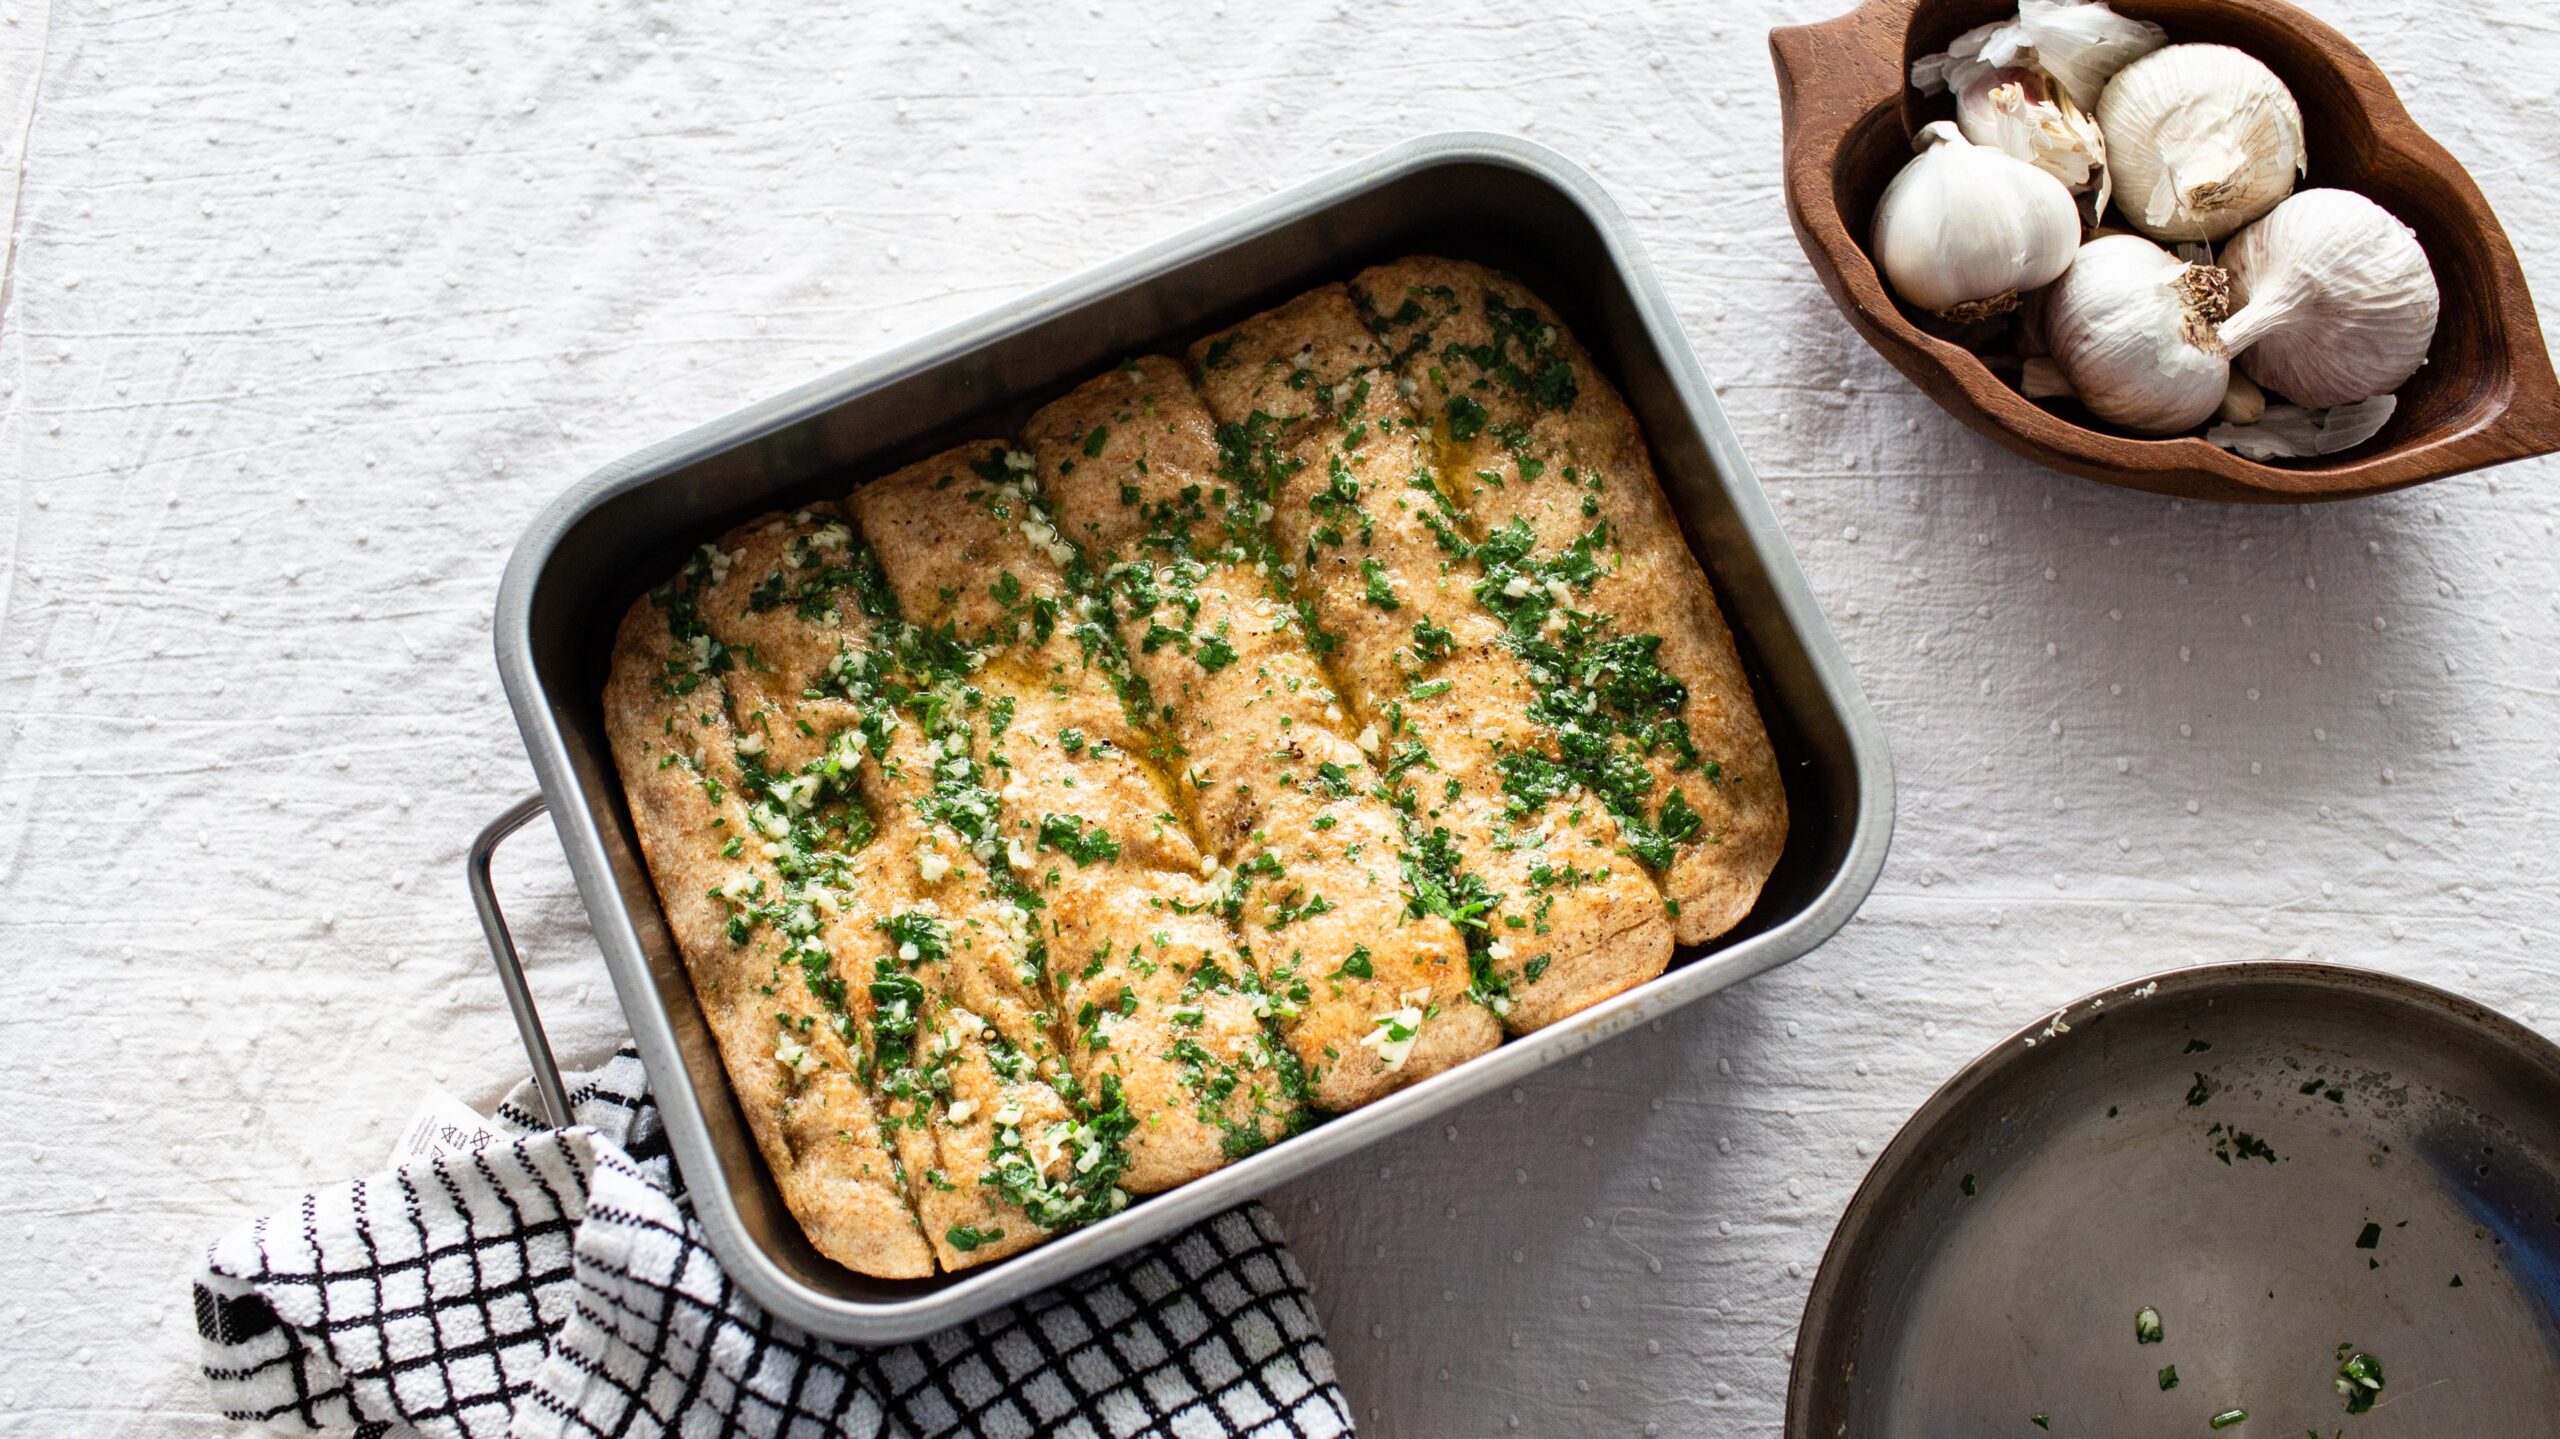  This vegan garlic bread is so good, even carnivores won't be able to resist it.